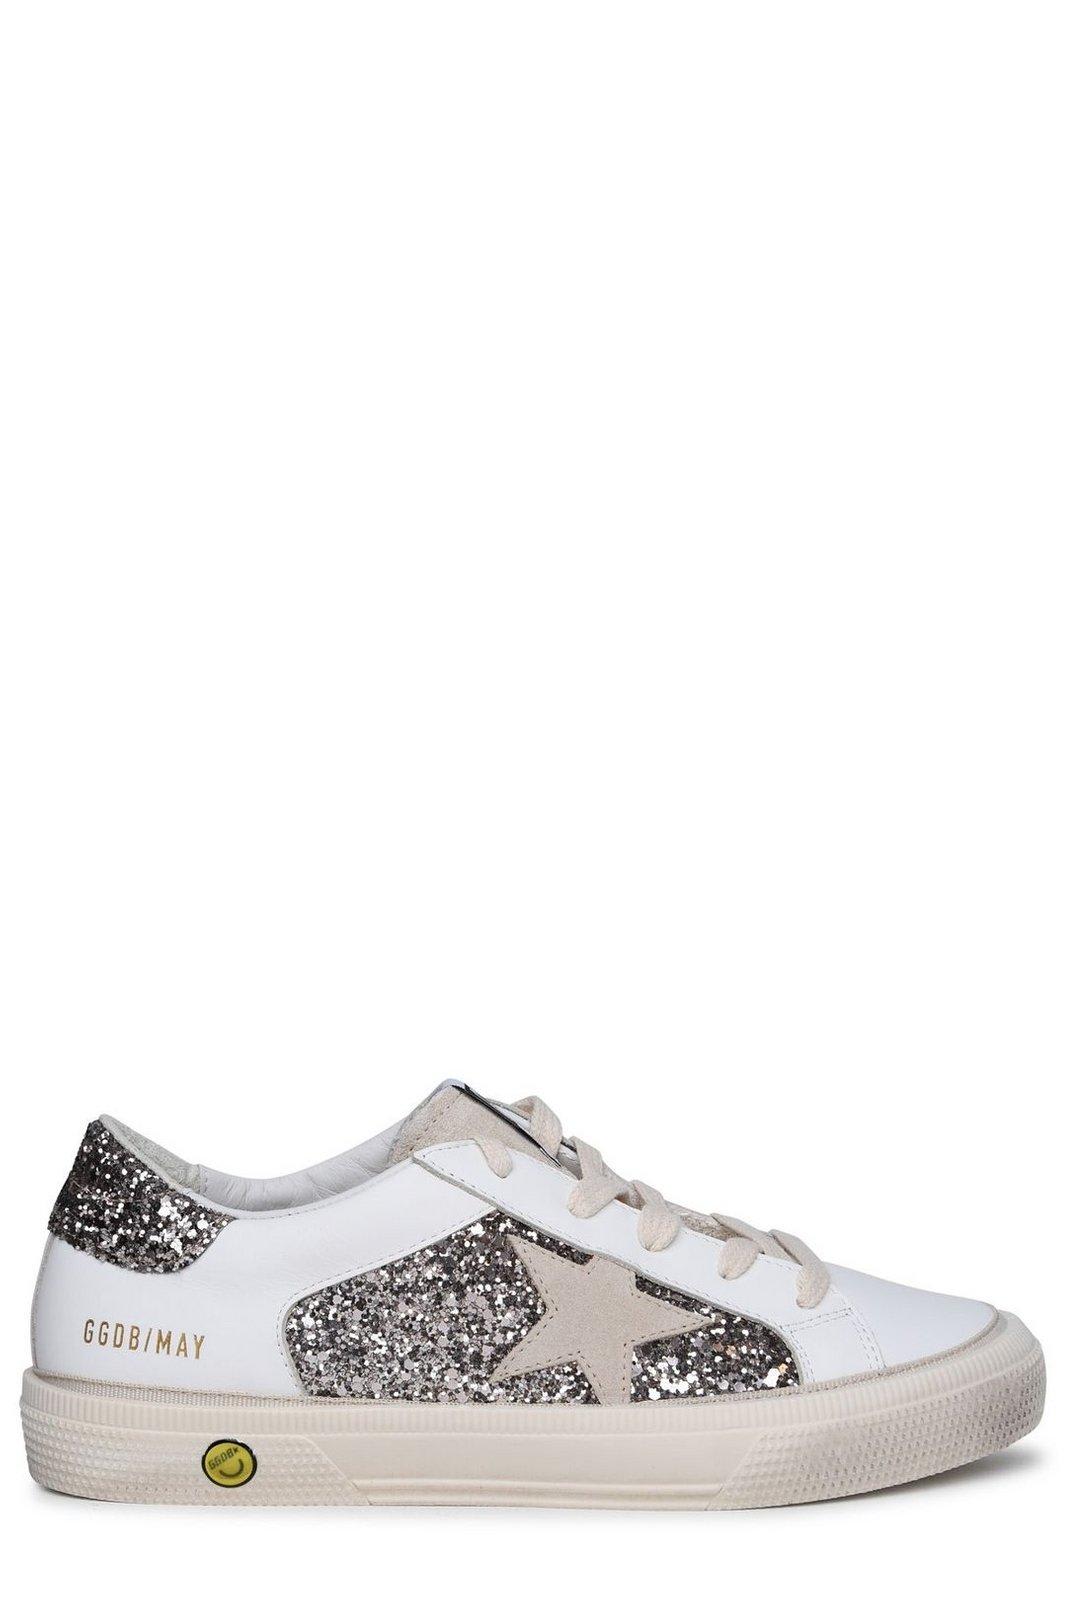 Golden Goose N May Star Glittered Sneakers